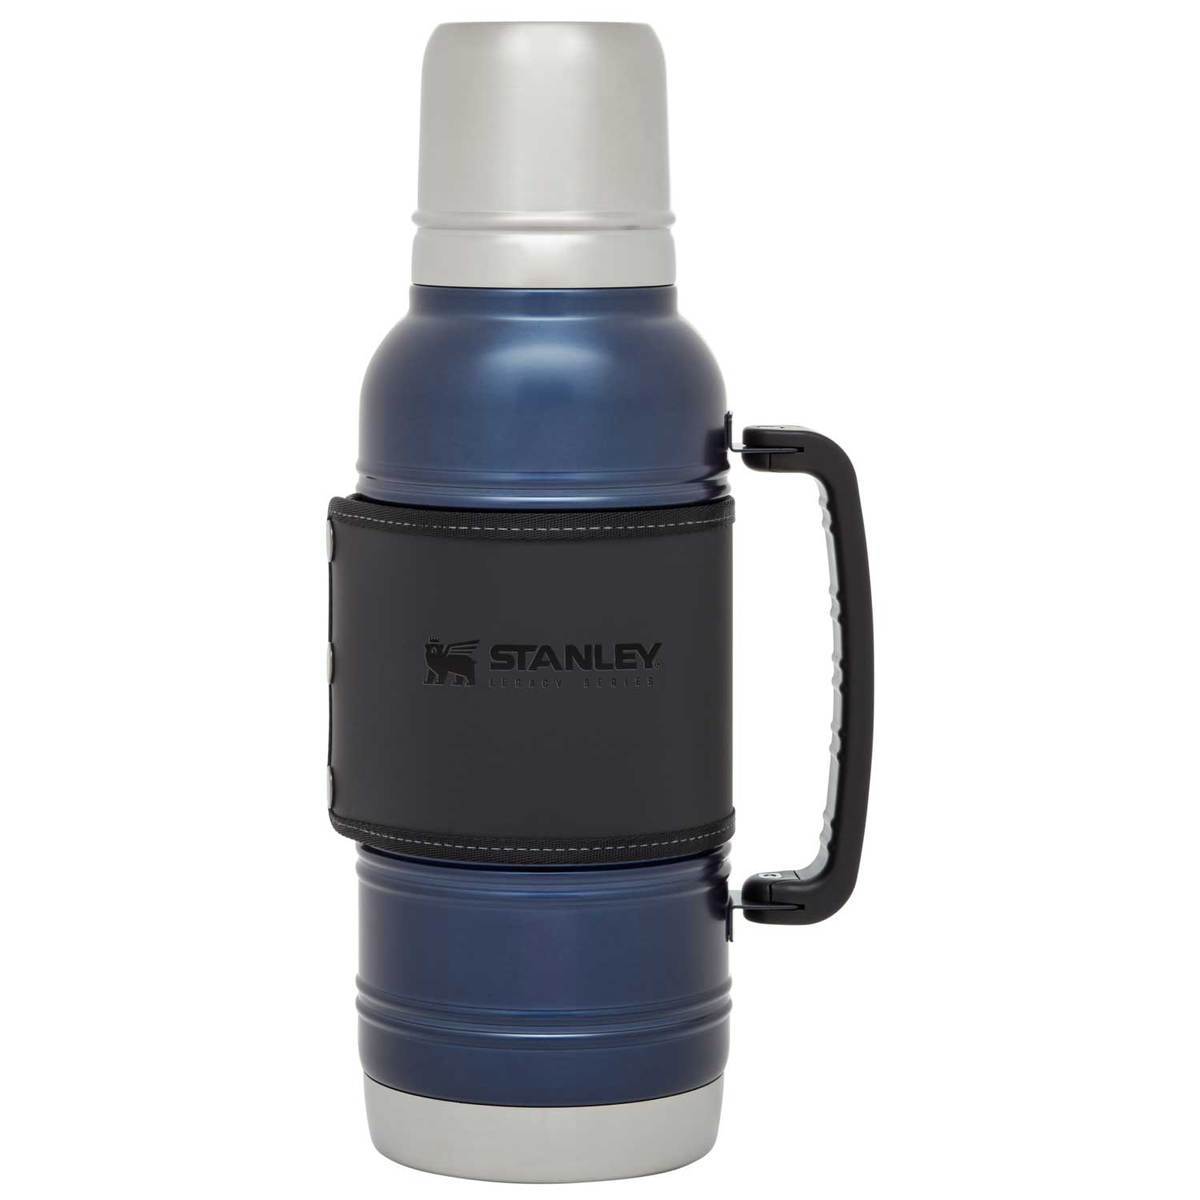 Stanley Vacuum Insulated Wide Mouth Bottle bright orange 1.5QT